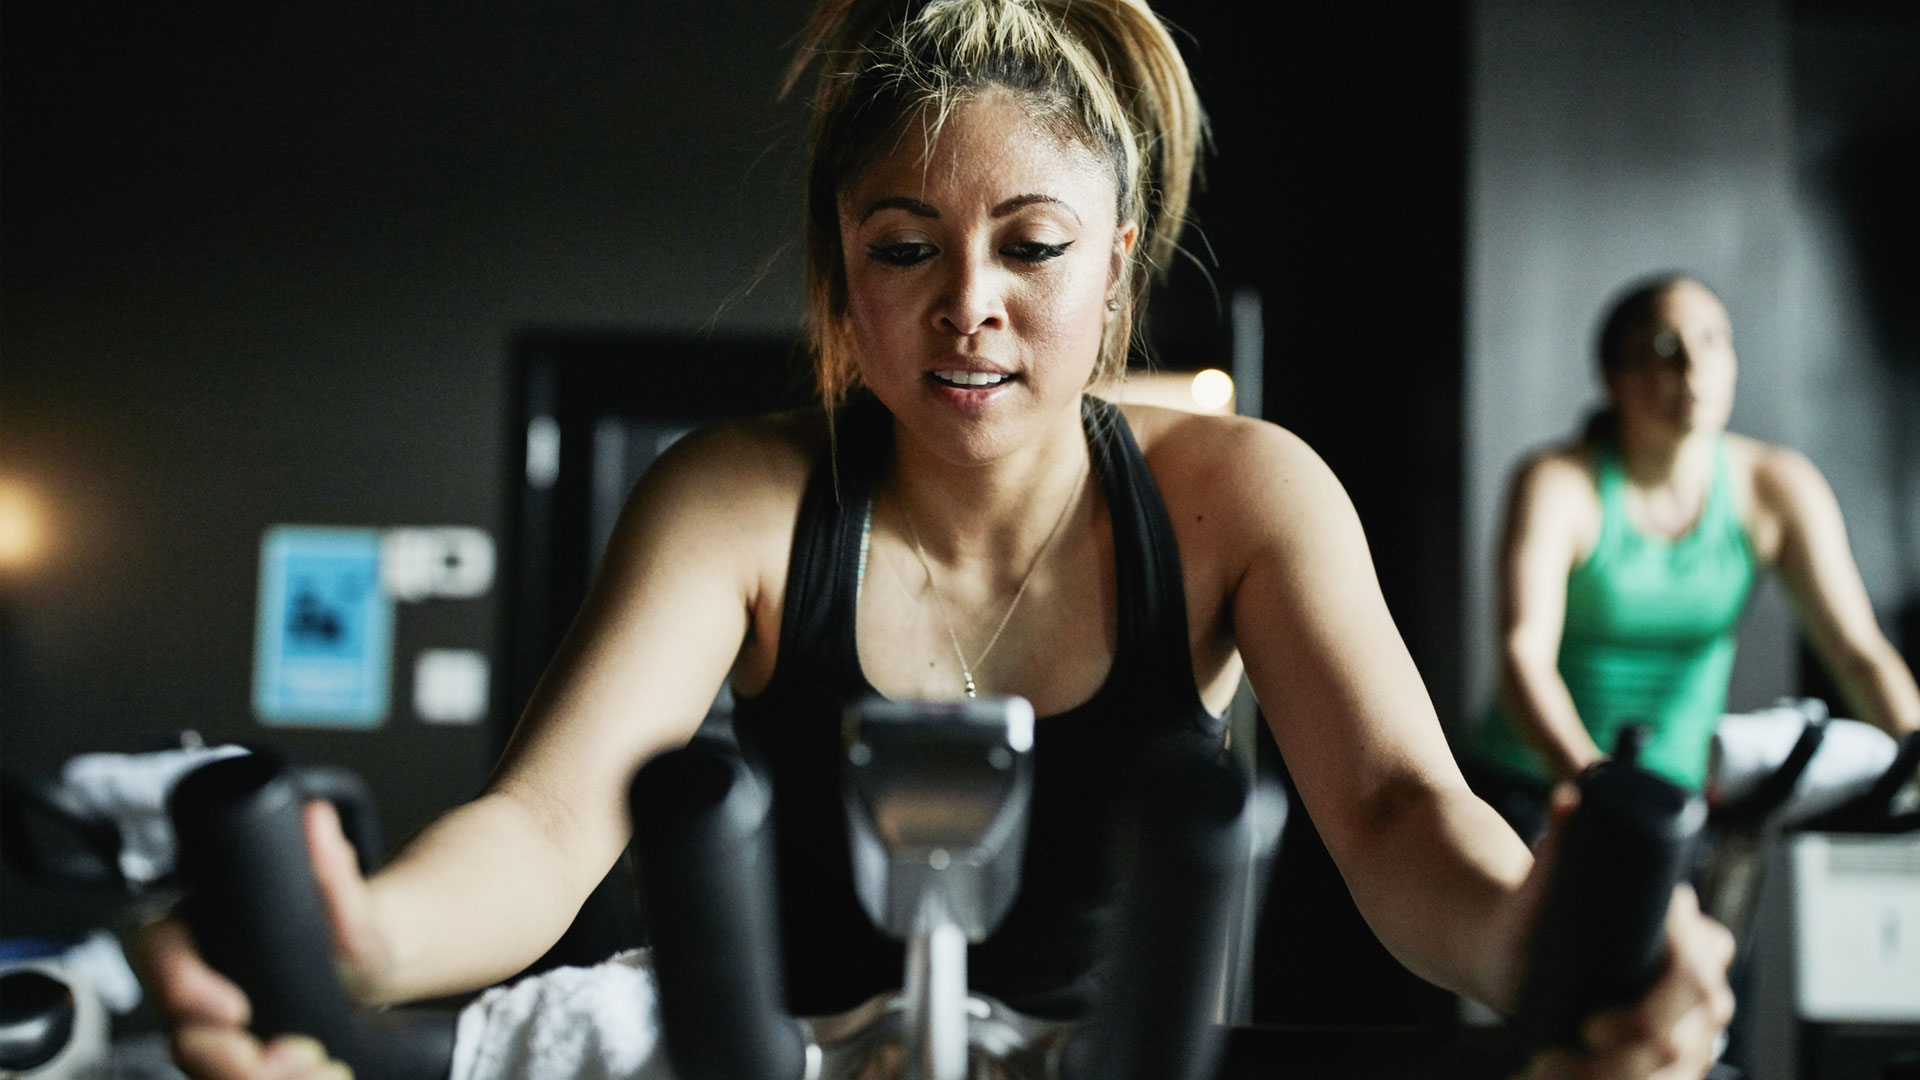 how to lose weight using an exercise bike: image shows woman on exercise bike at gym